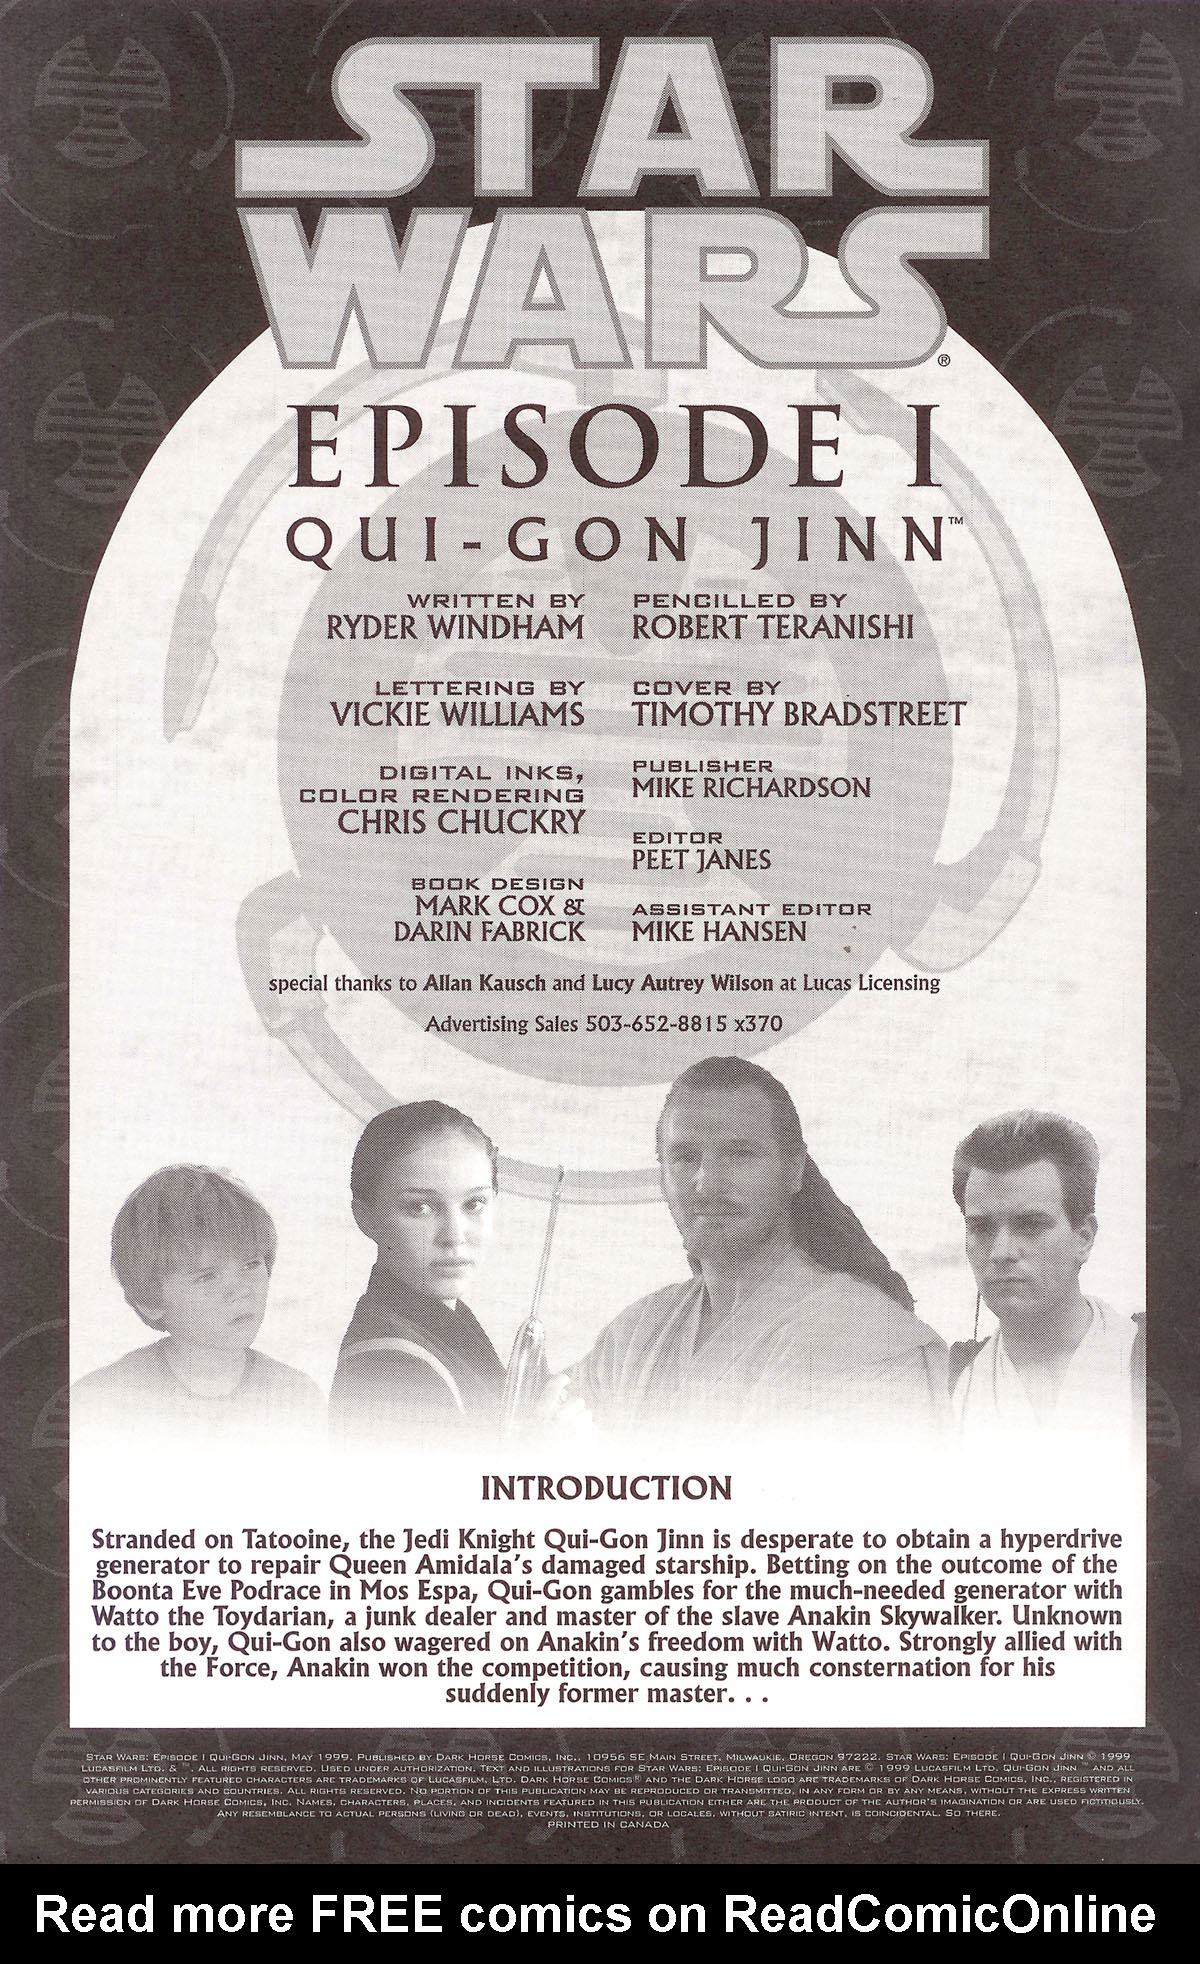 Read online Star Wars: Episode I comic -  Issue # Issue - Qui-Gon Jinn - 2